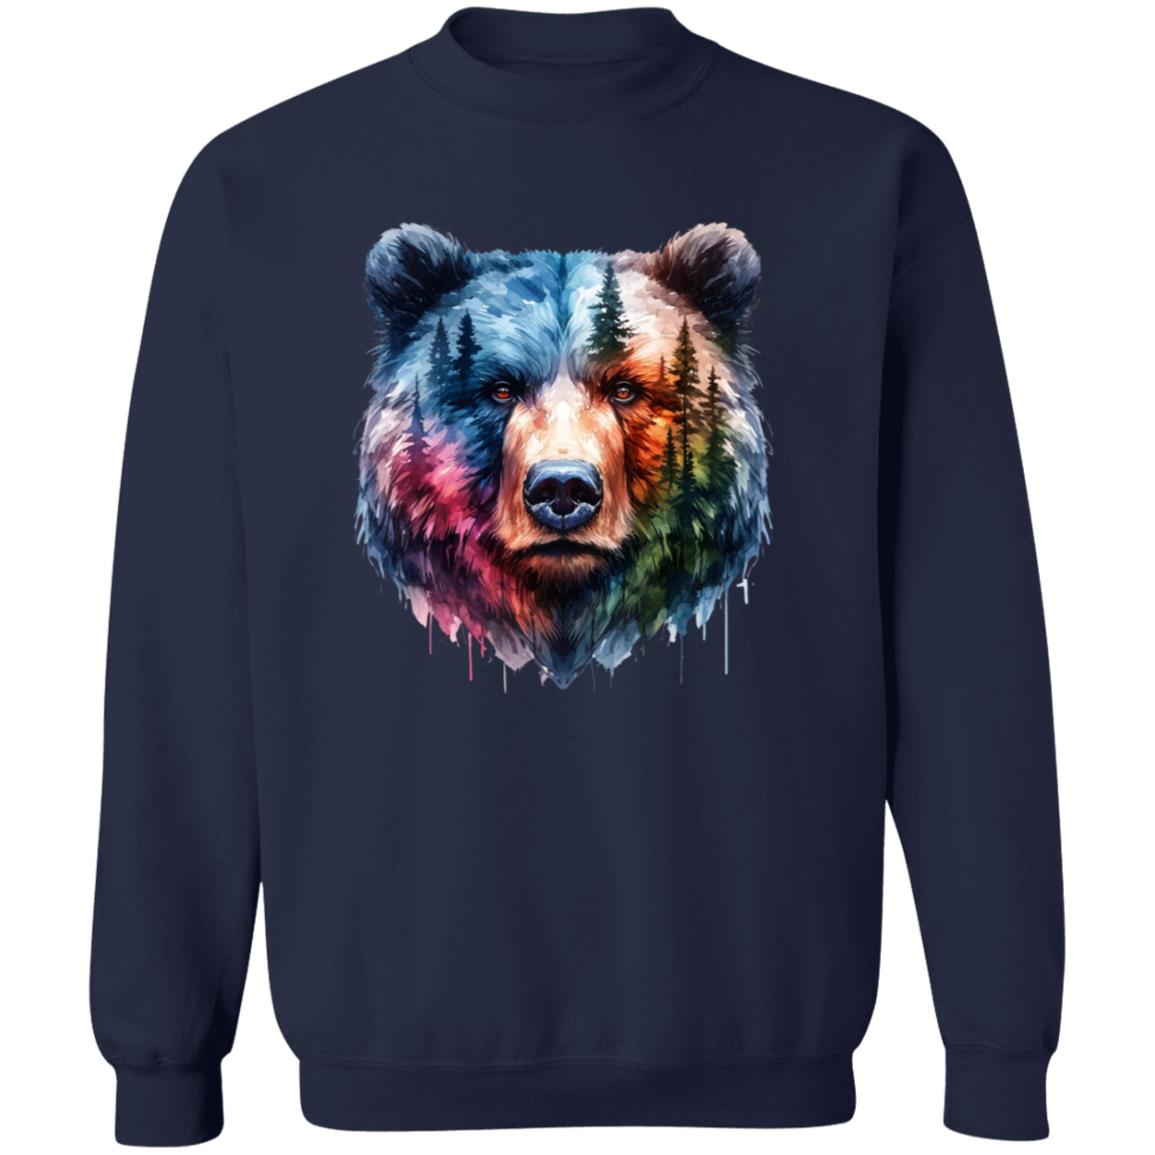 Grizzly and Forest Watercolor Unisex Sweatshirt Black Navy Dark Heather-Family-Gift-Planet